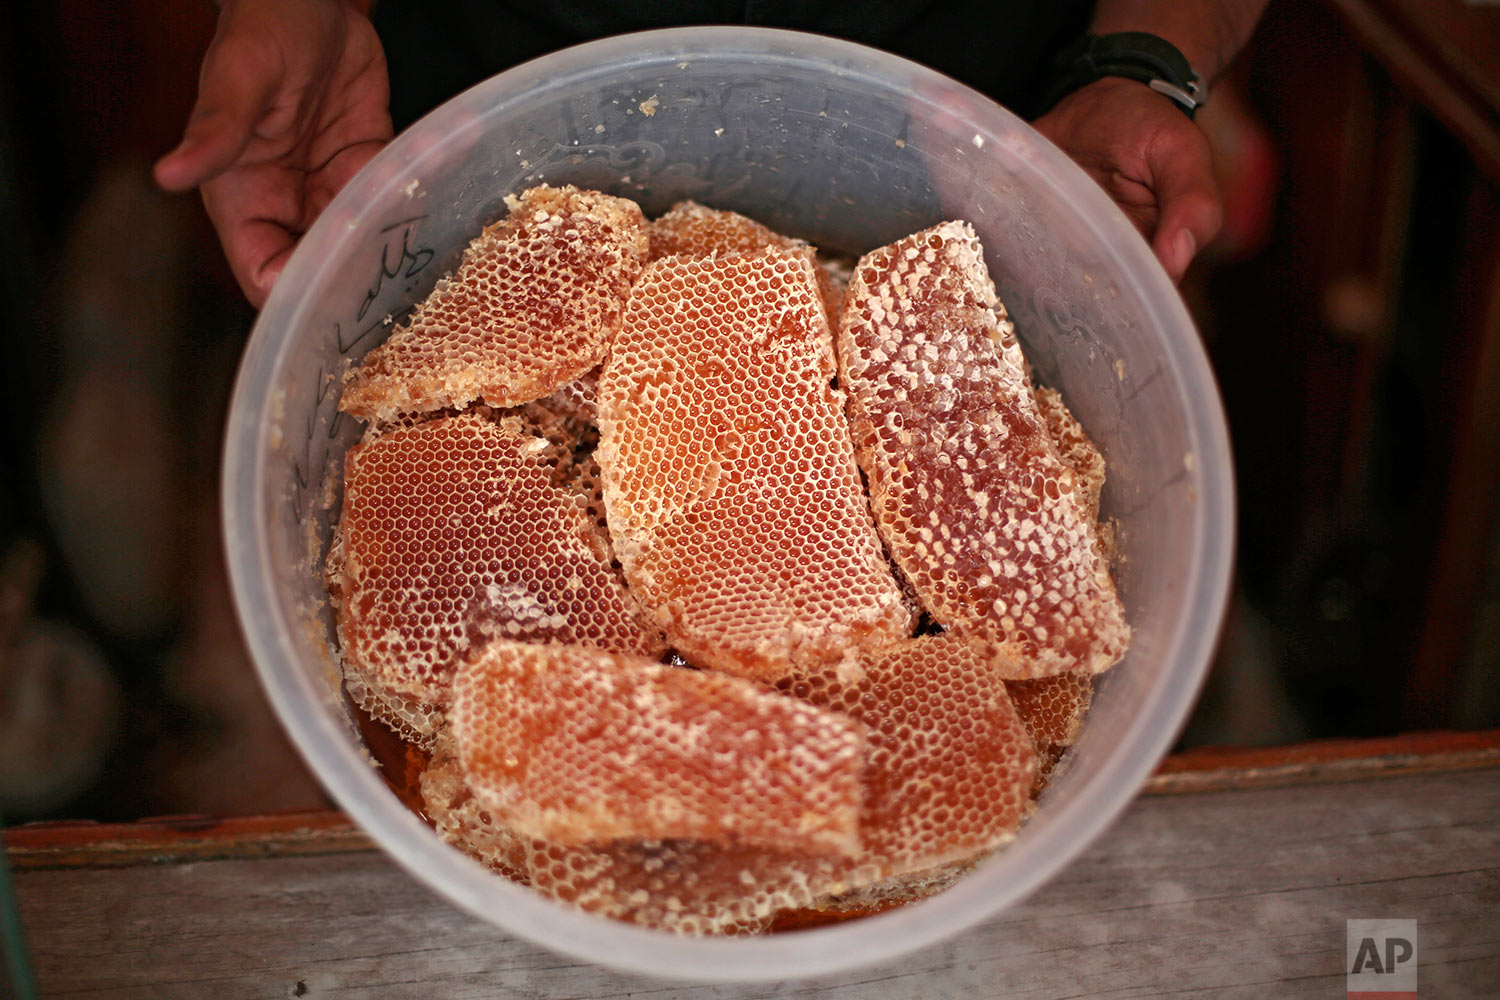  A Yemeni vendor displays honeycomb for sale in a shop in Sanaa, Yemen on Aug. 22, 2017. Yemen’s ruinous civil war has claimed an unlikely victim: The country’s prized honey industry. Thick, rich and as dense as liquid gold, Yemen’s honey has traditi